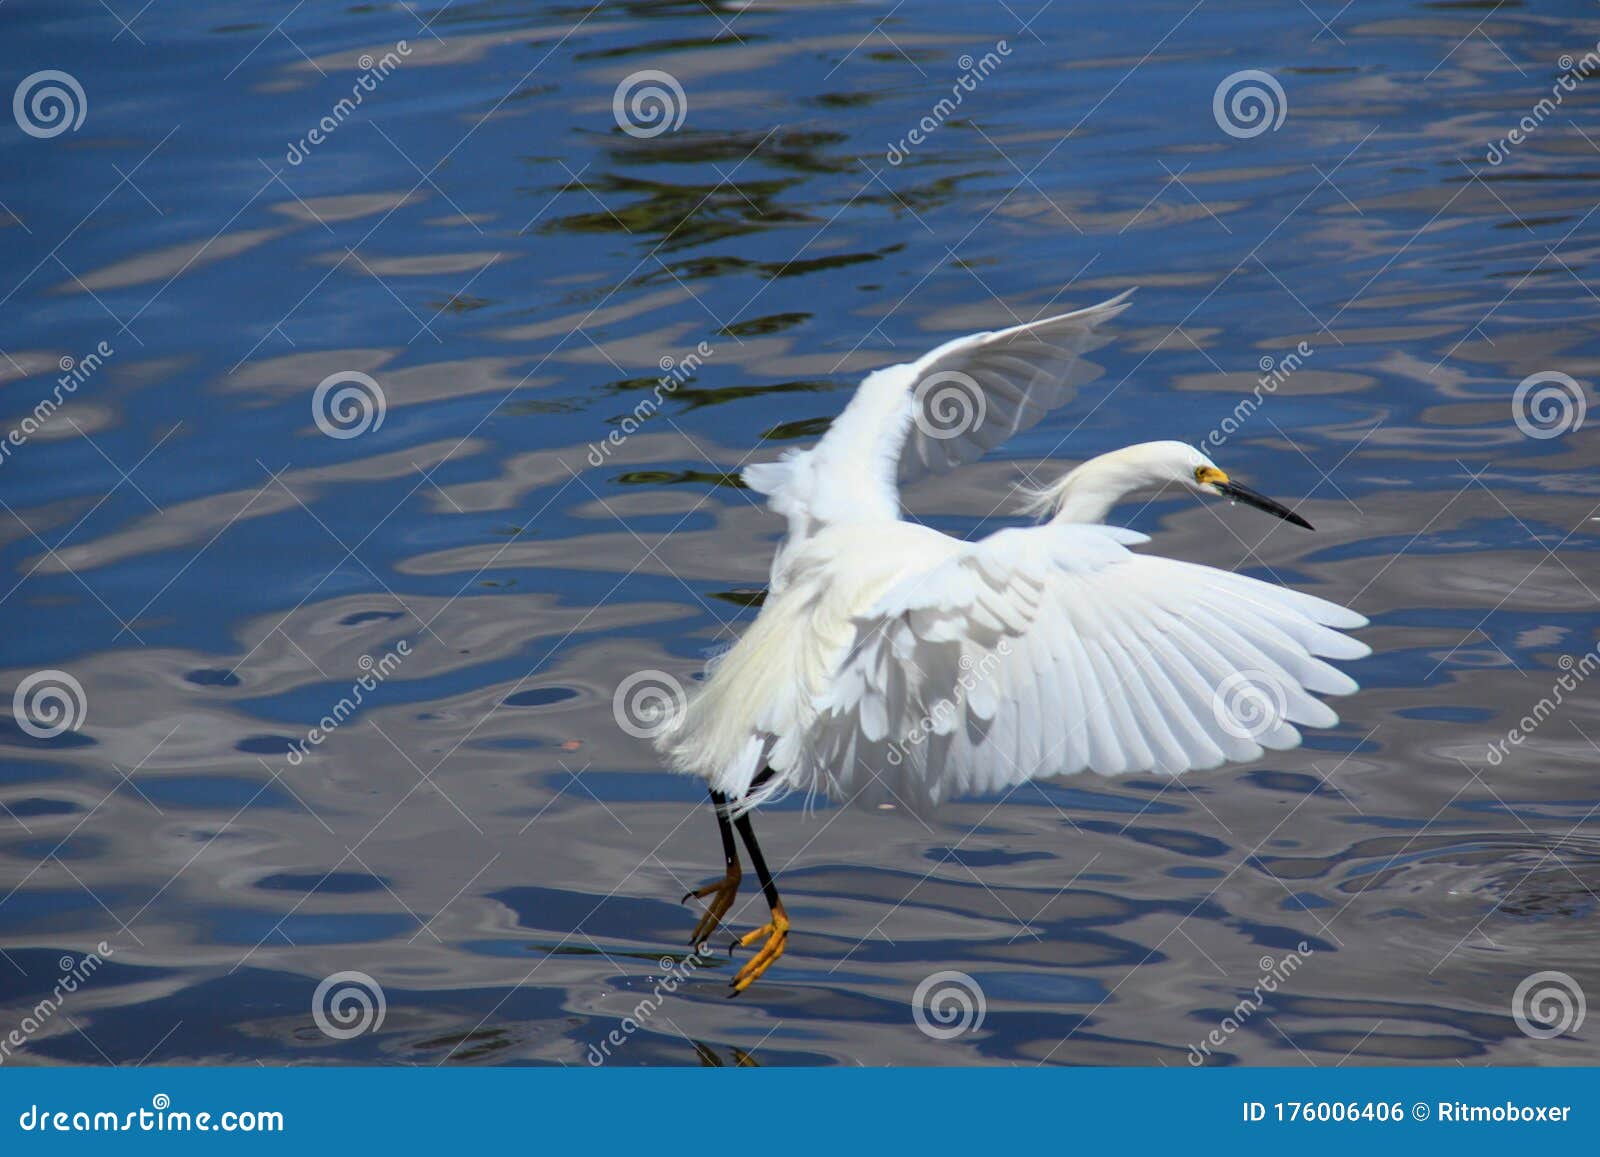 snowy egret flying over a lake